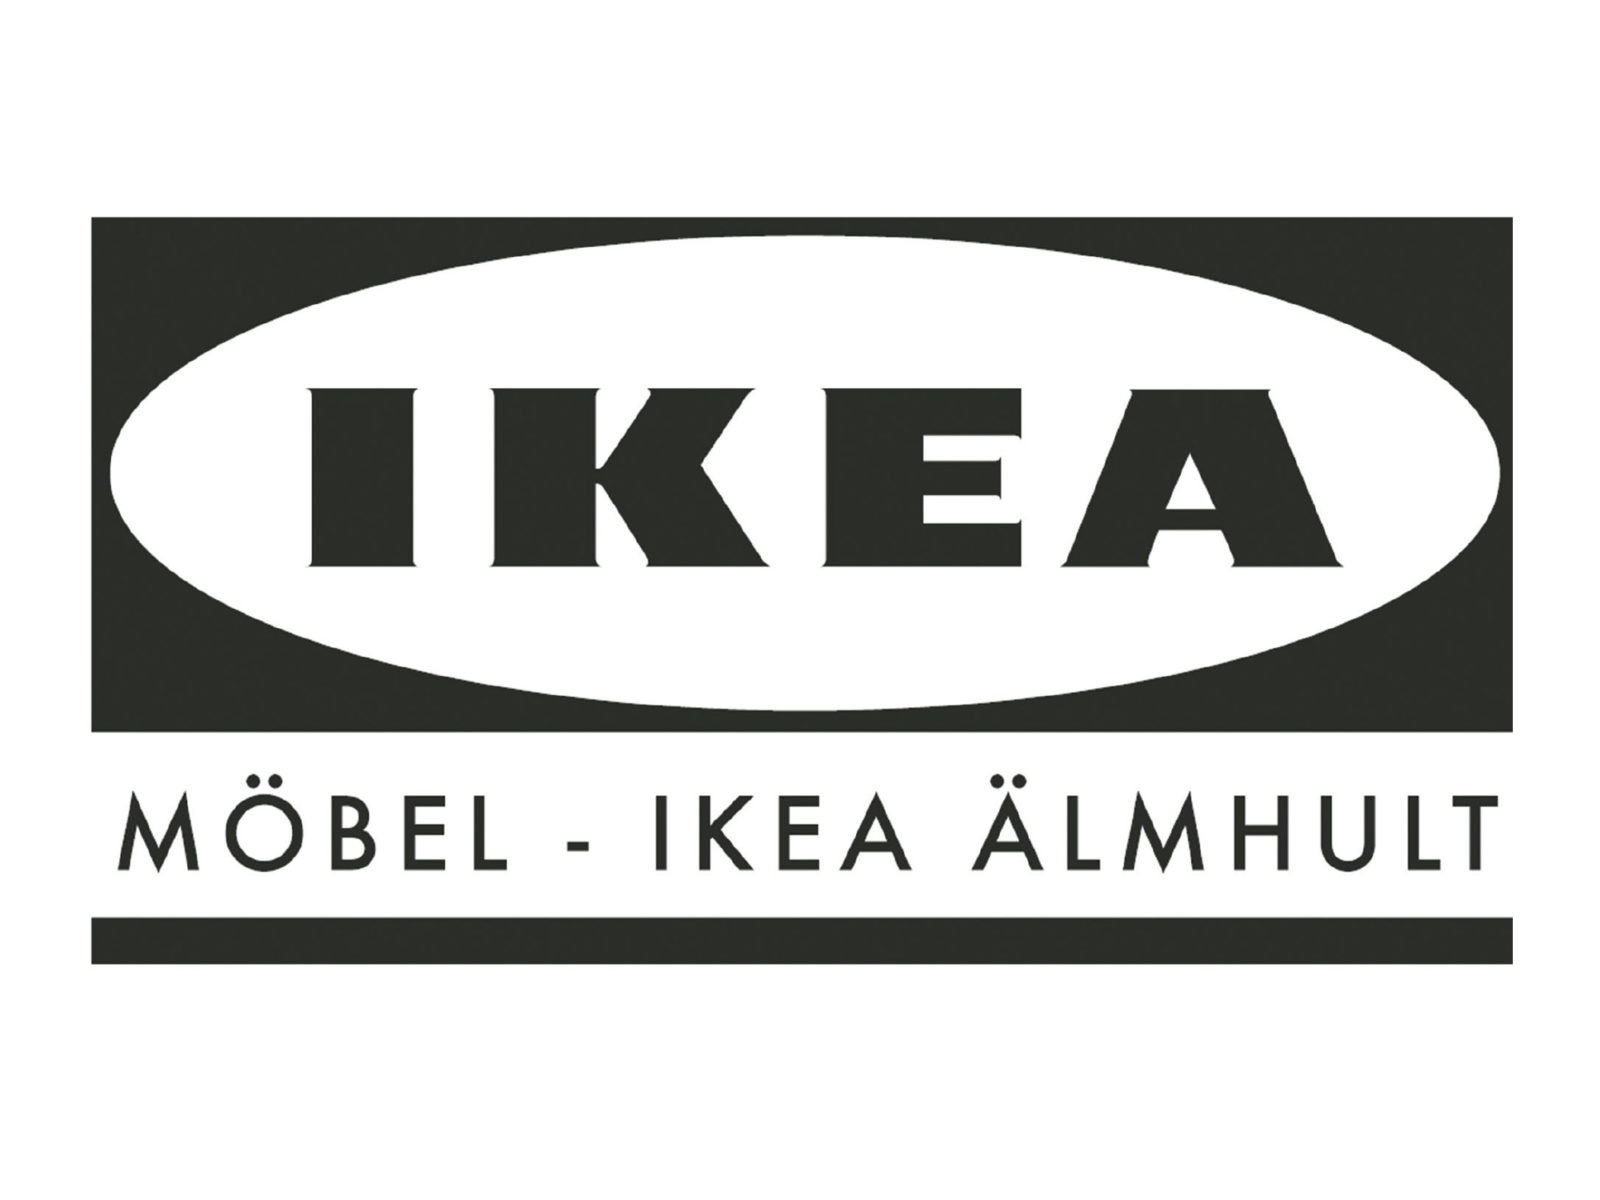 IKEA in black capitals on white oval on black background. On white border beneath oval text says FURNITURE - IKEA ÄLMHULT.